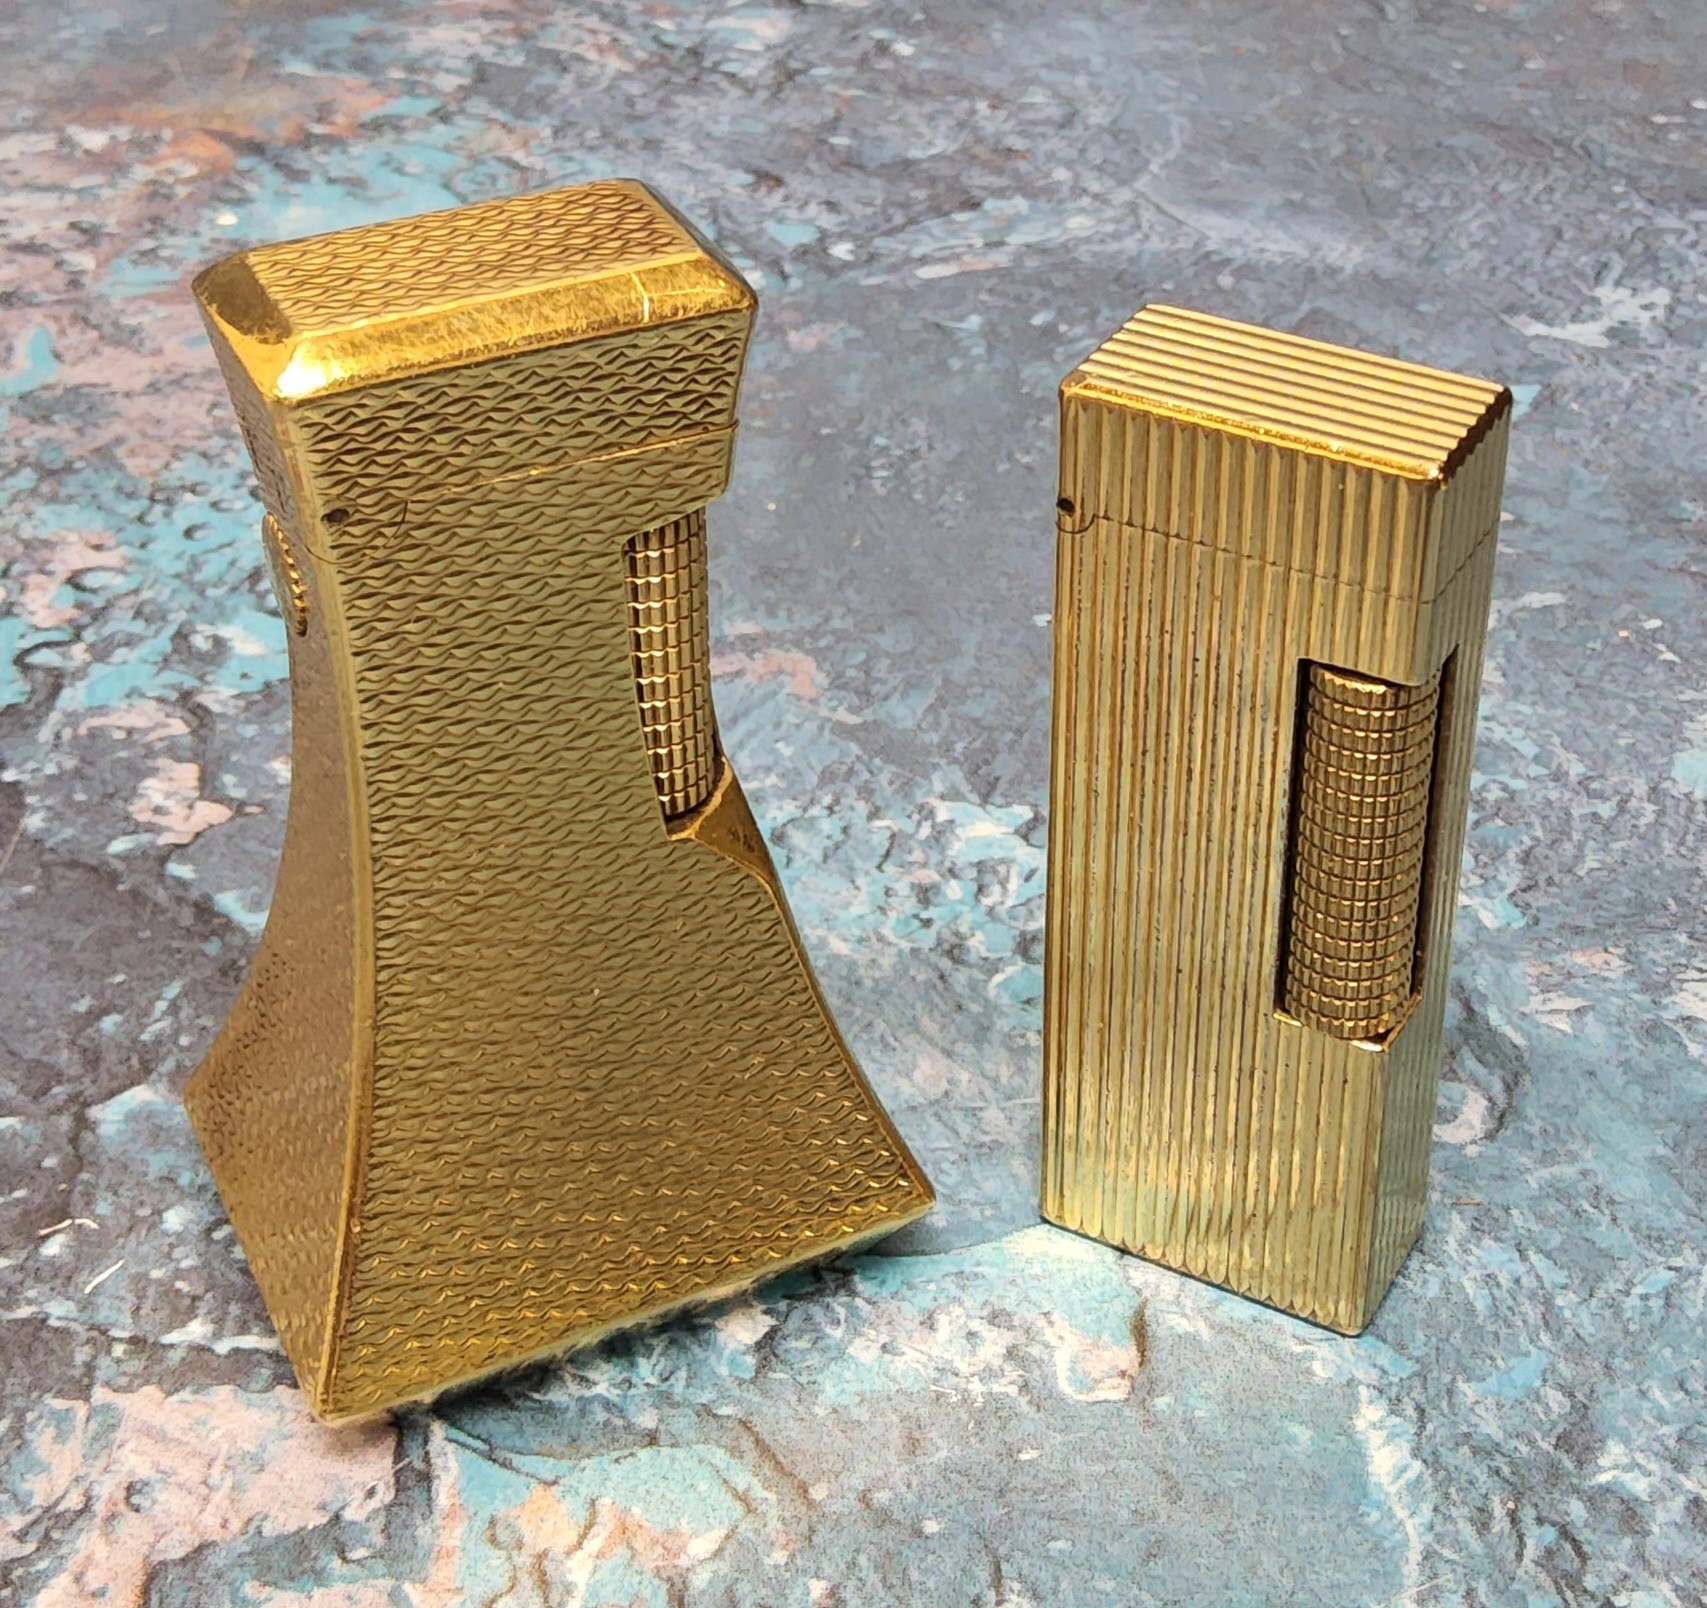 A Dunhill Deluxe gold plated table/desk lighter, signed Dunhill; a Dunhill gold plated lighter